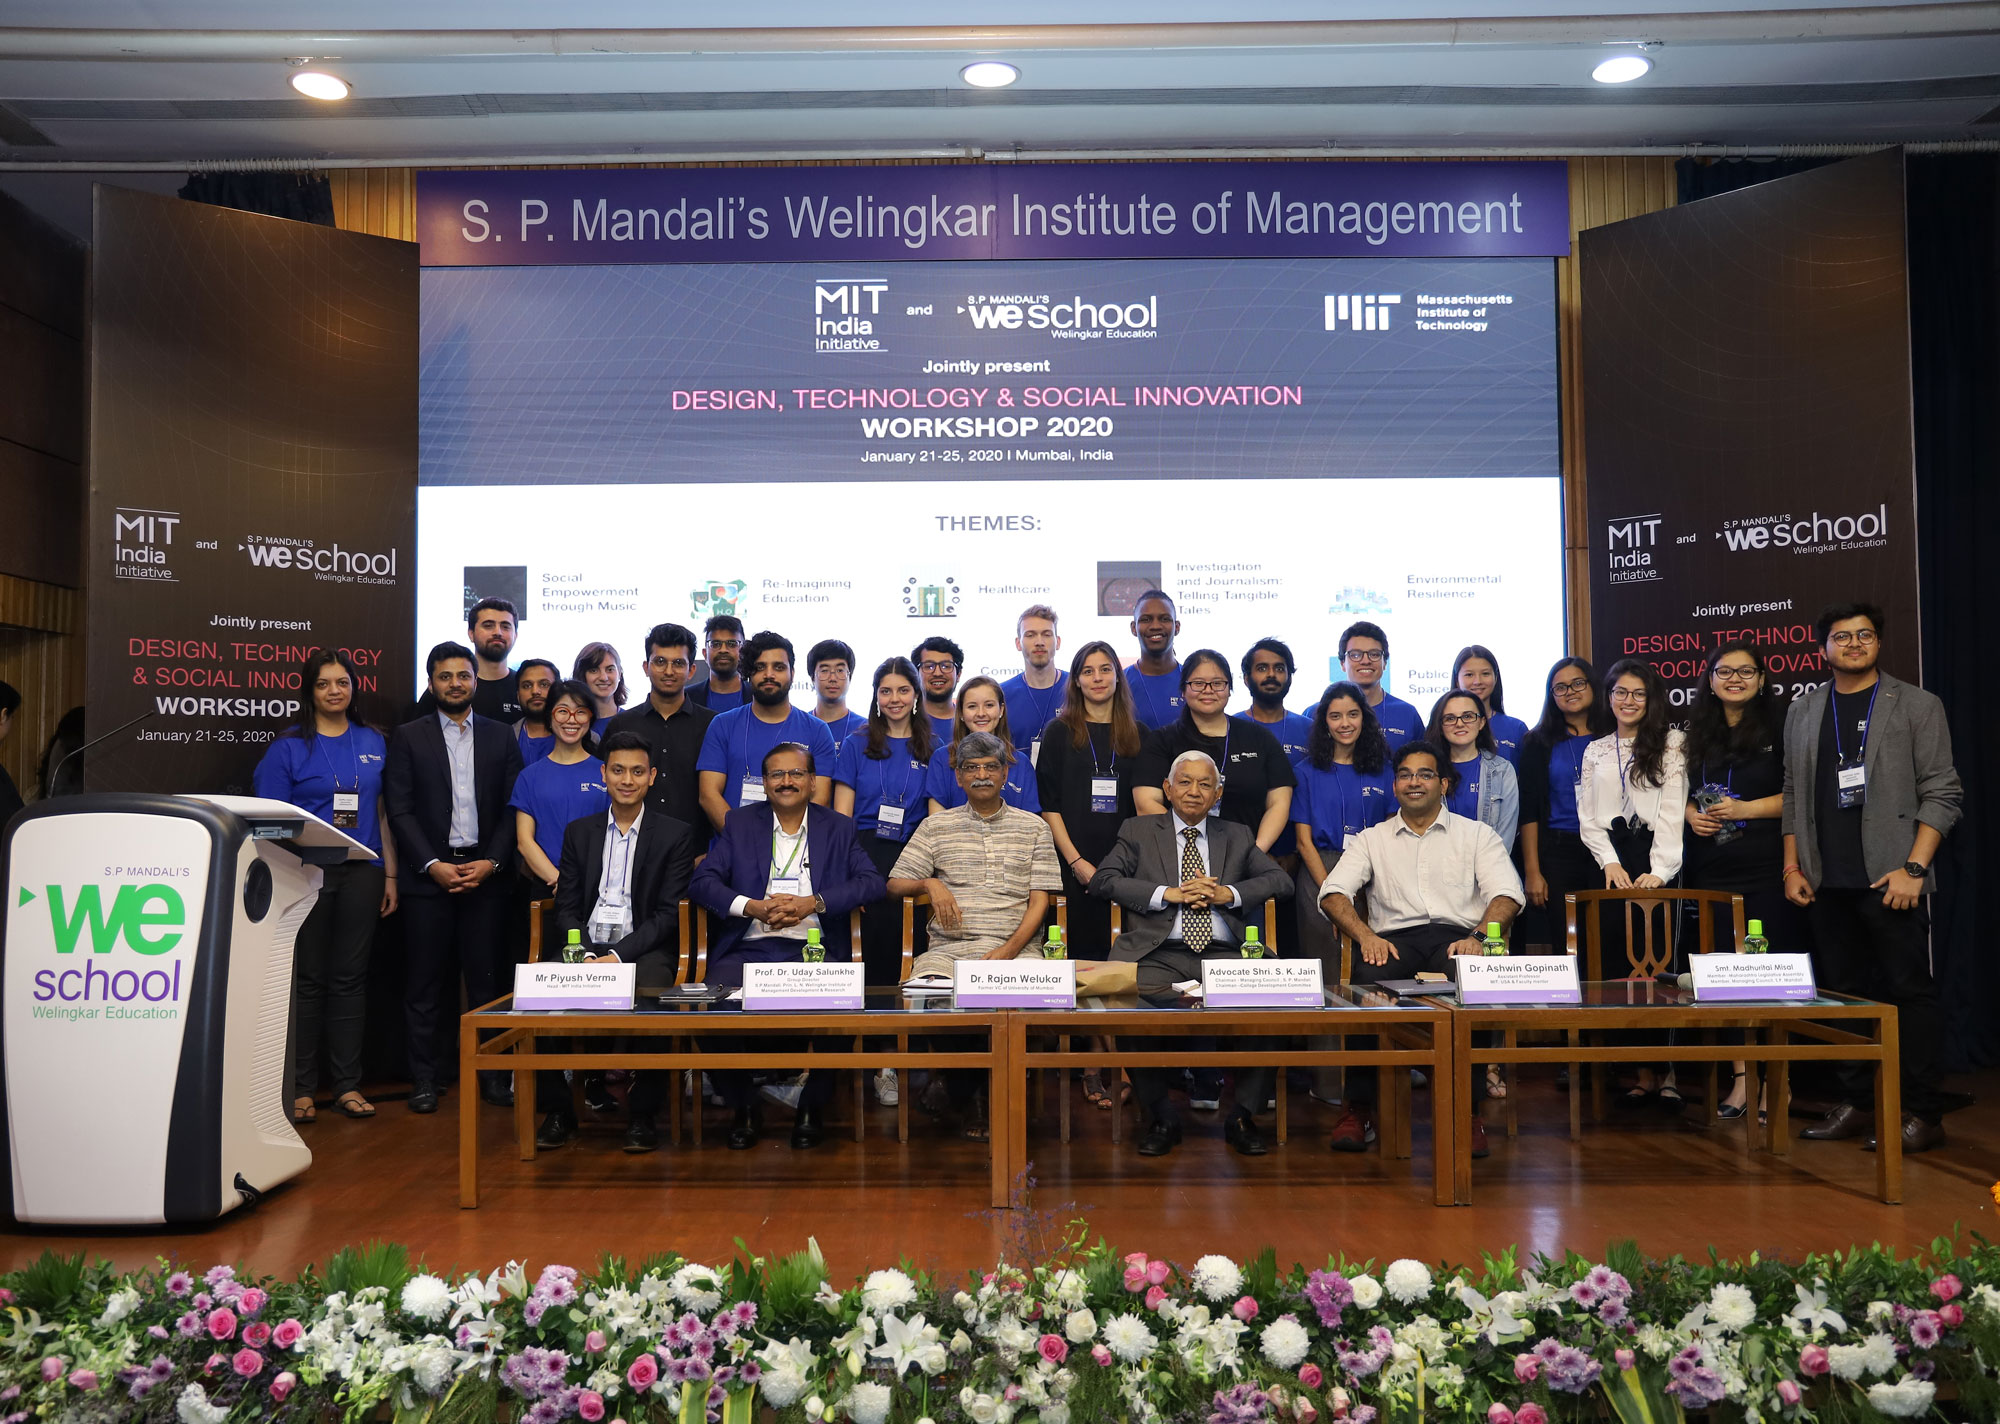 S.P. Mandali's WeSchool and MIT India Initiative jointly present the 'Design, Technology and Social Innovation Workshop 2020'